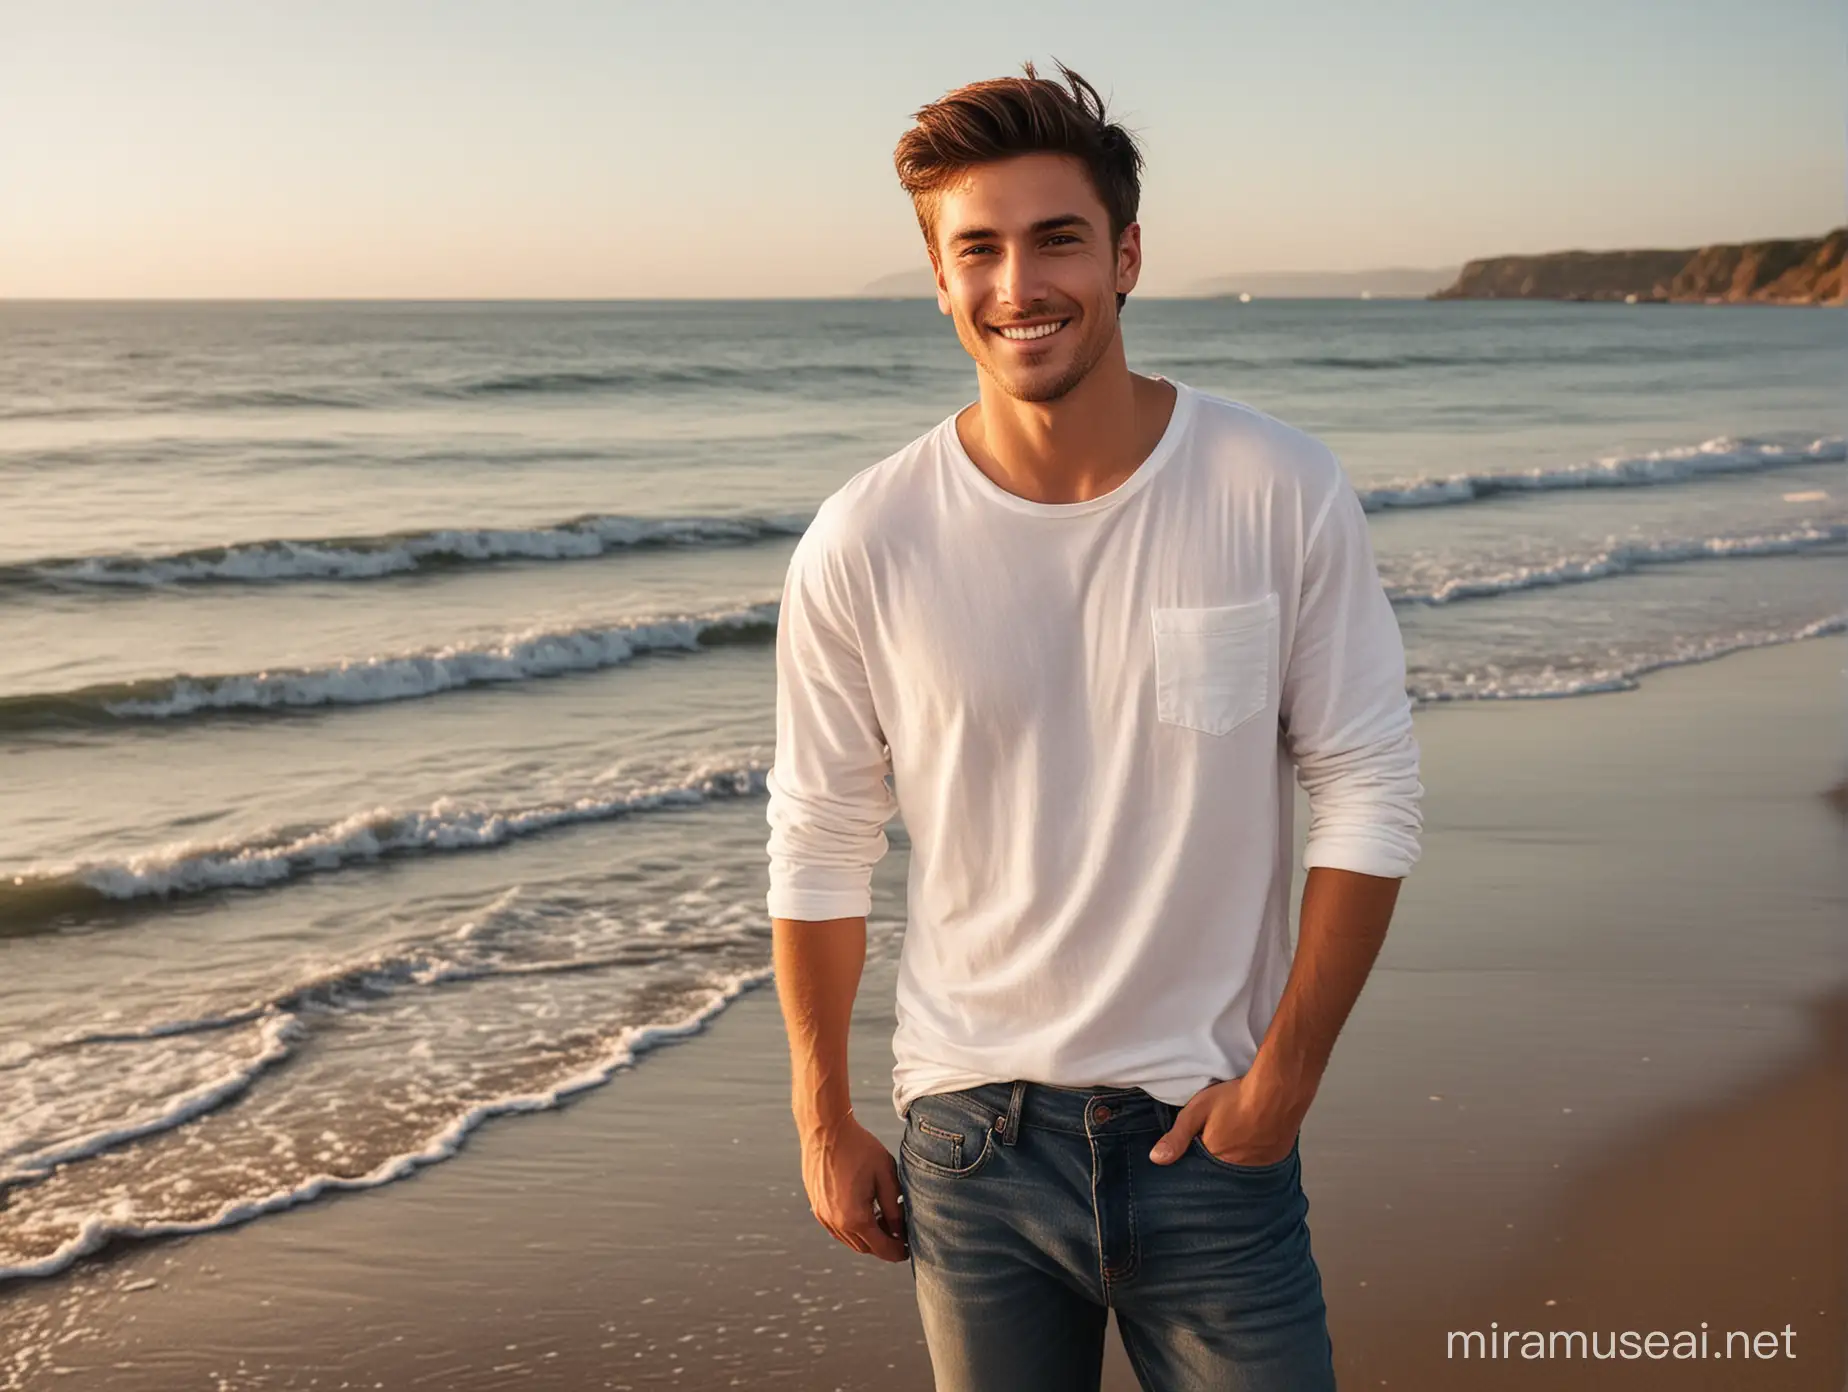 Young Man Enjoying Beach Sunset in Casual White TShirt and Jeans